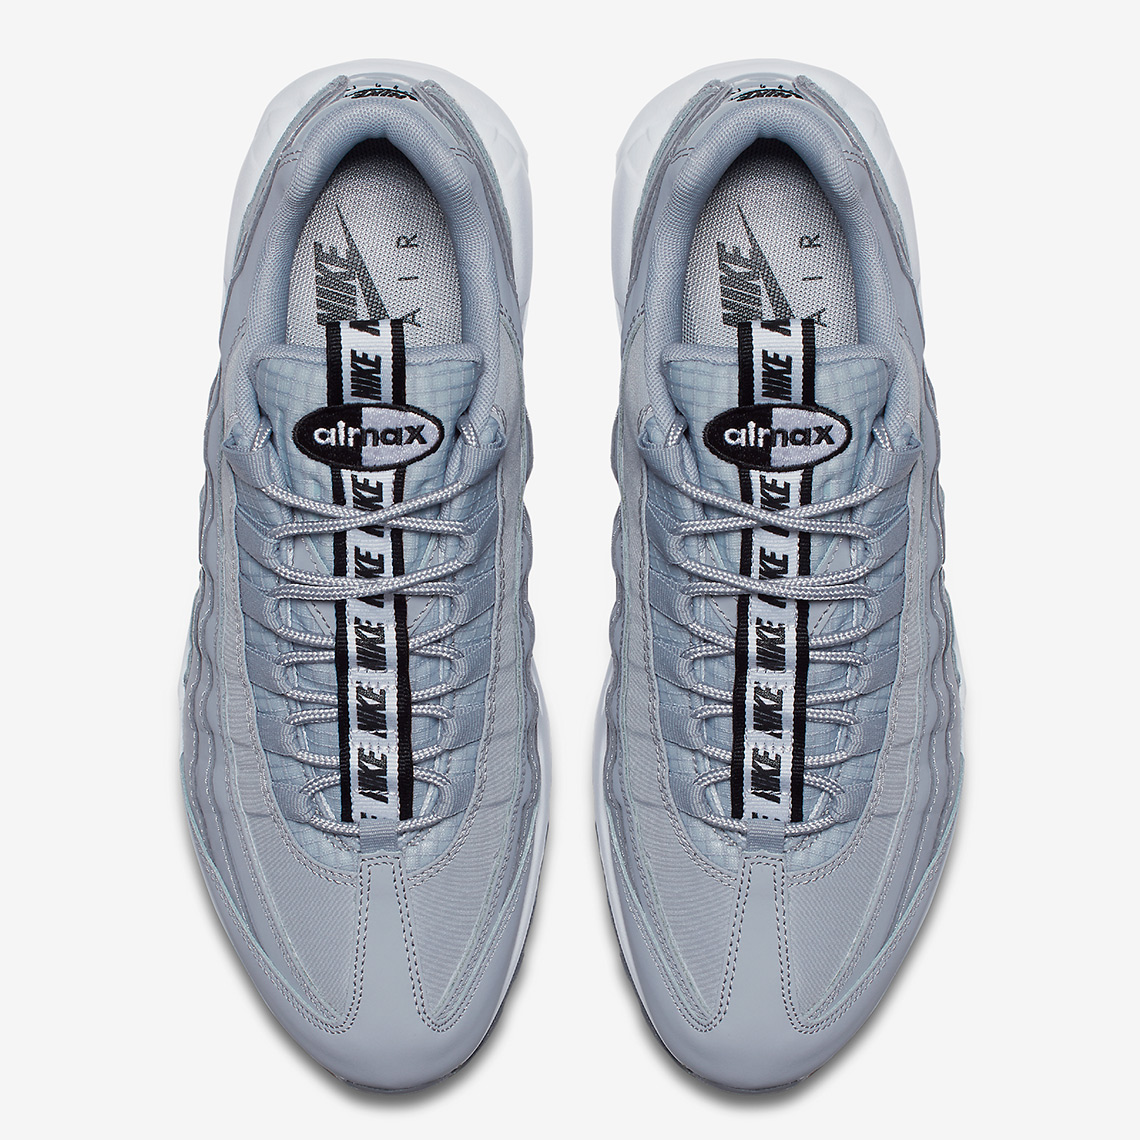 Nike Air Max Pull Tab Pack Official Images 12